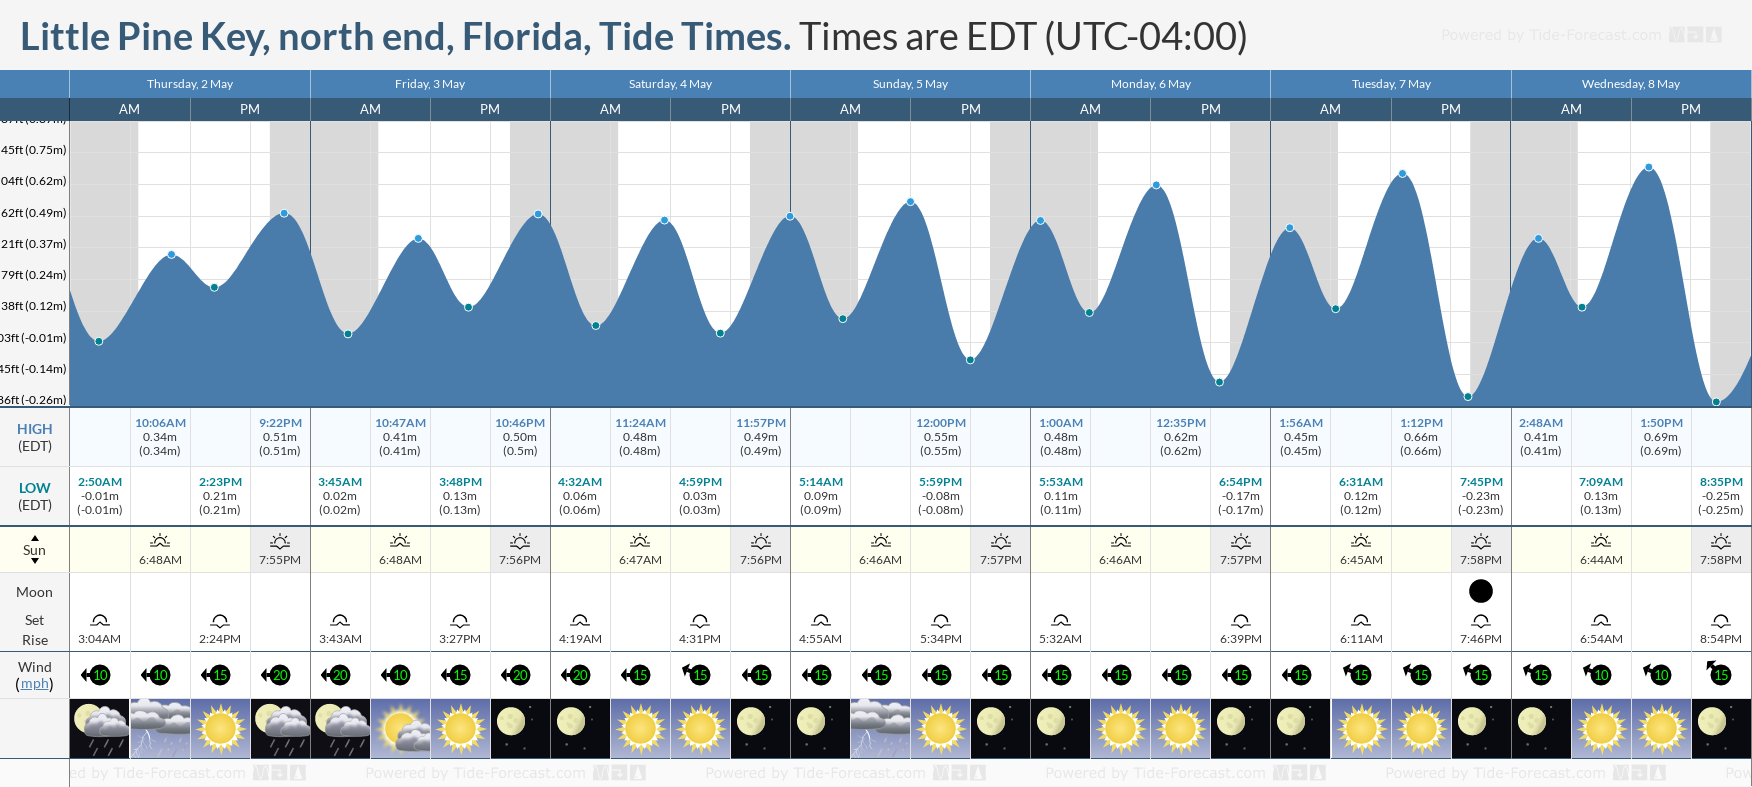 Little Pine Key, north end, Florida Tide Chart including high and low tide tide times for the next 7 days